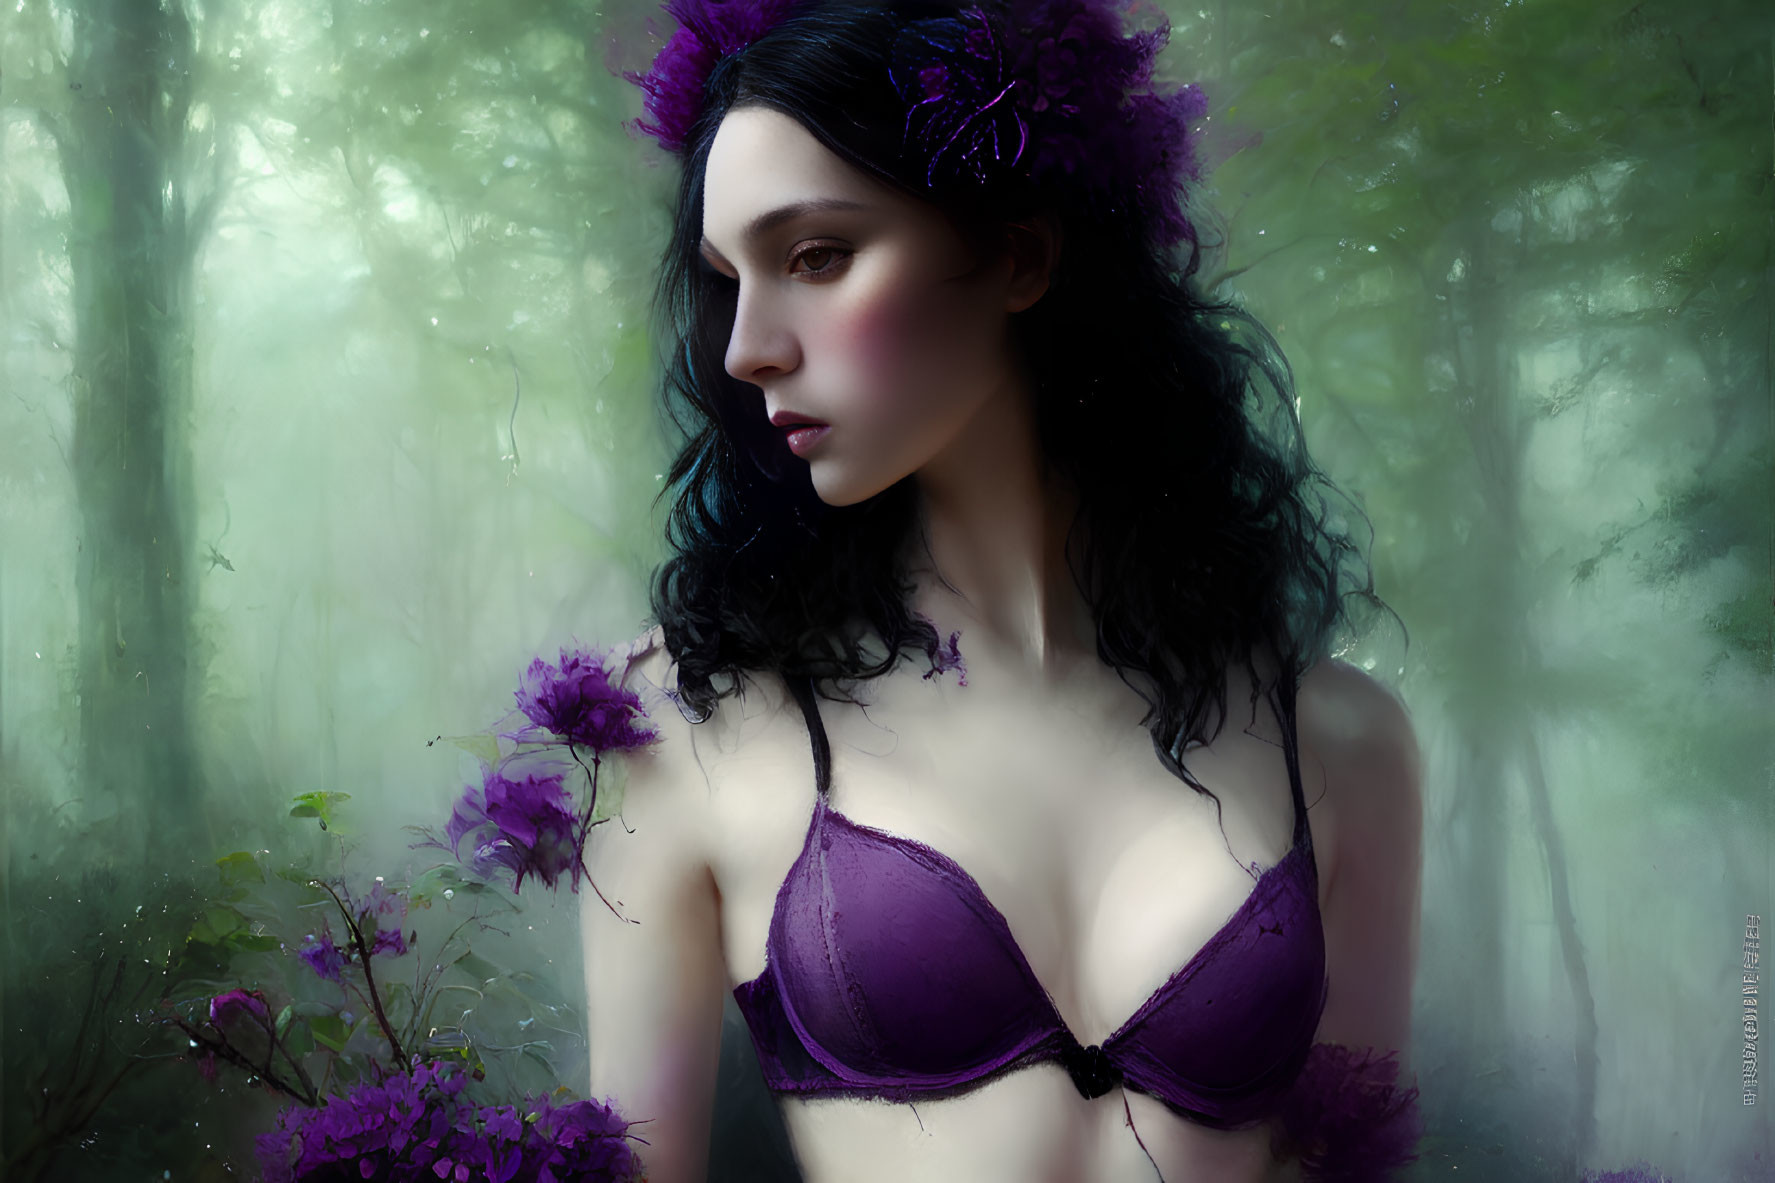 Woman in Purple Bra with Flower Hair in Misty Forest Setting